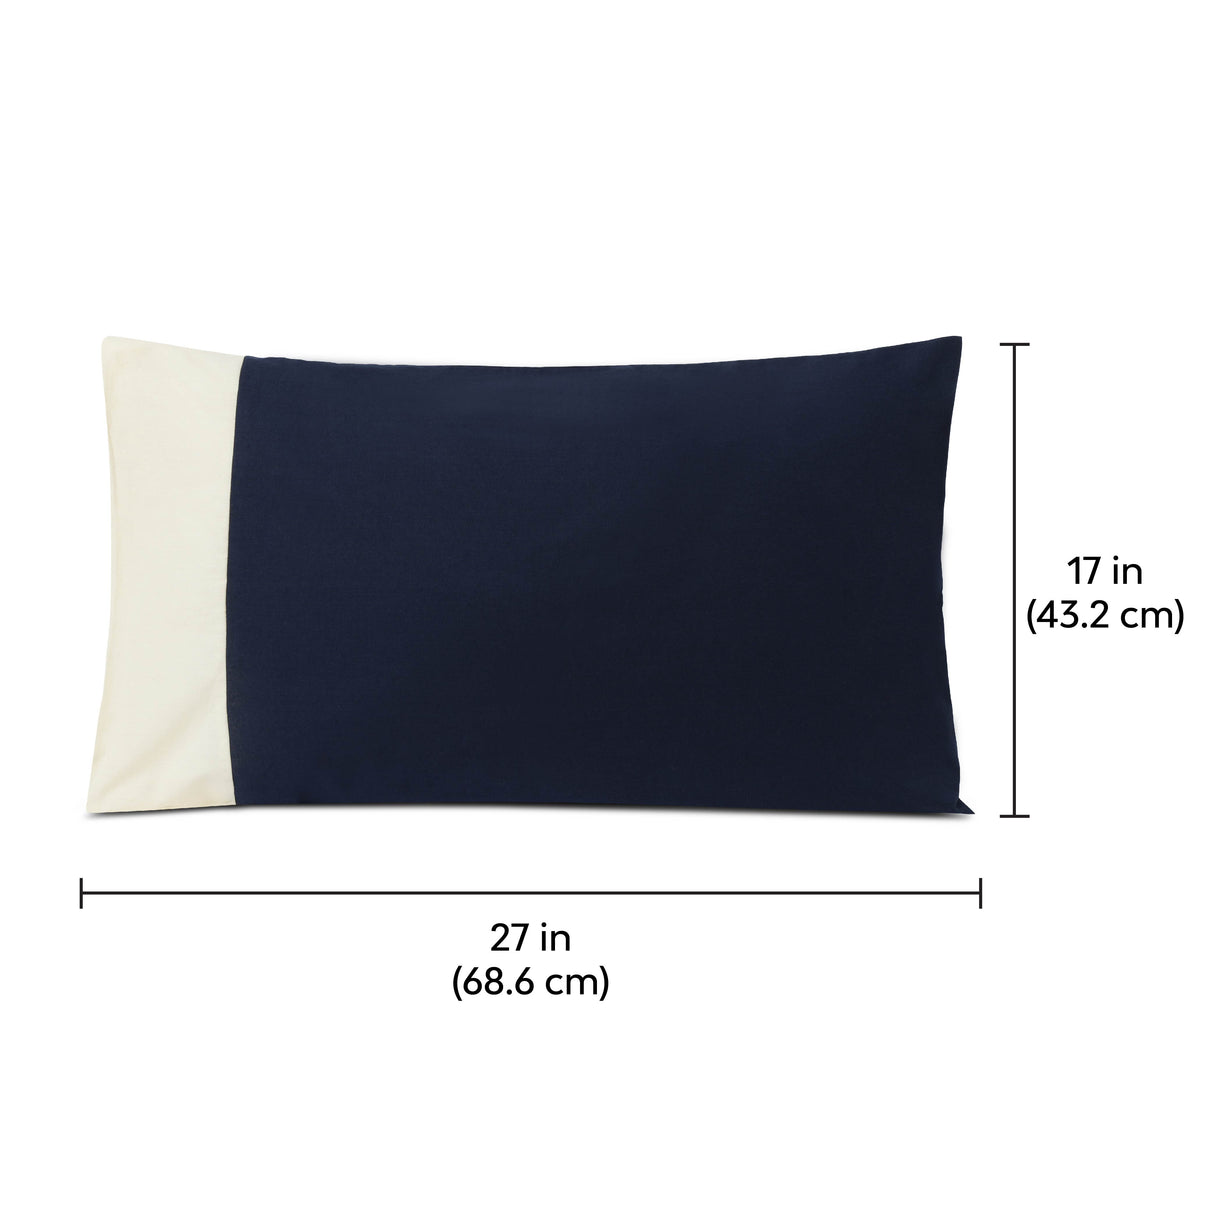 Pillow cover size 